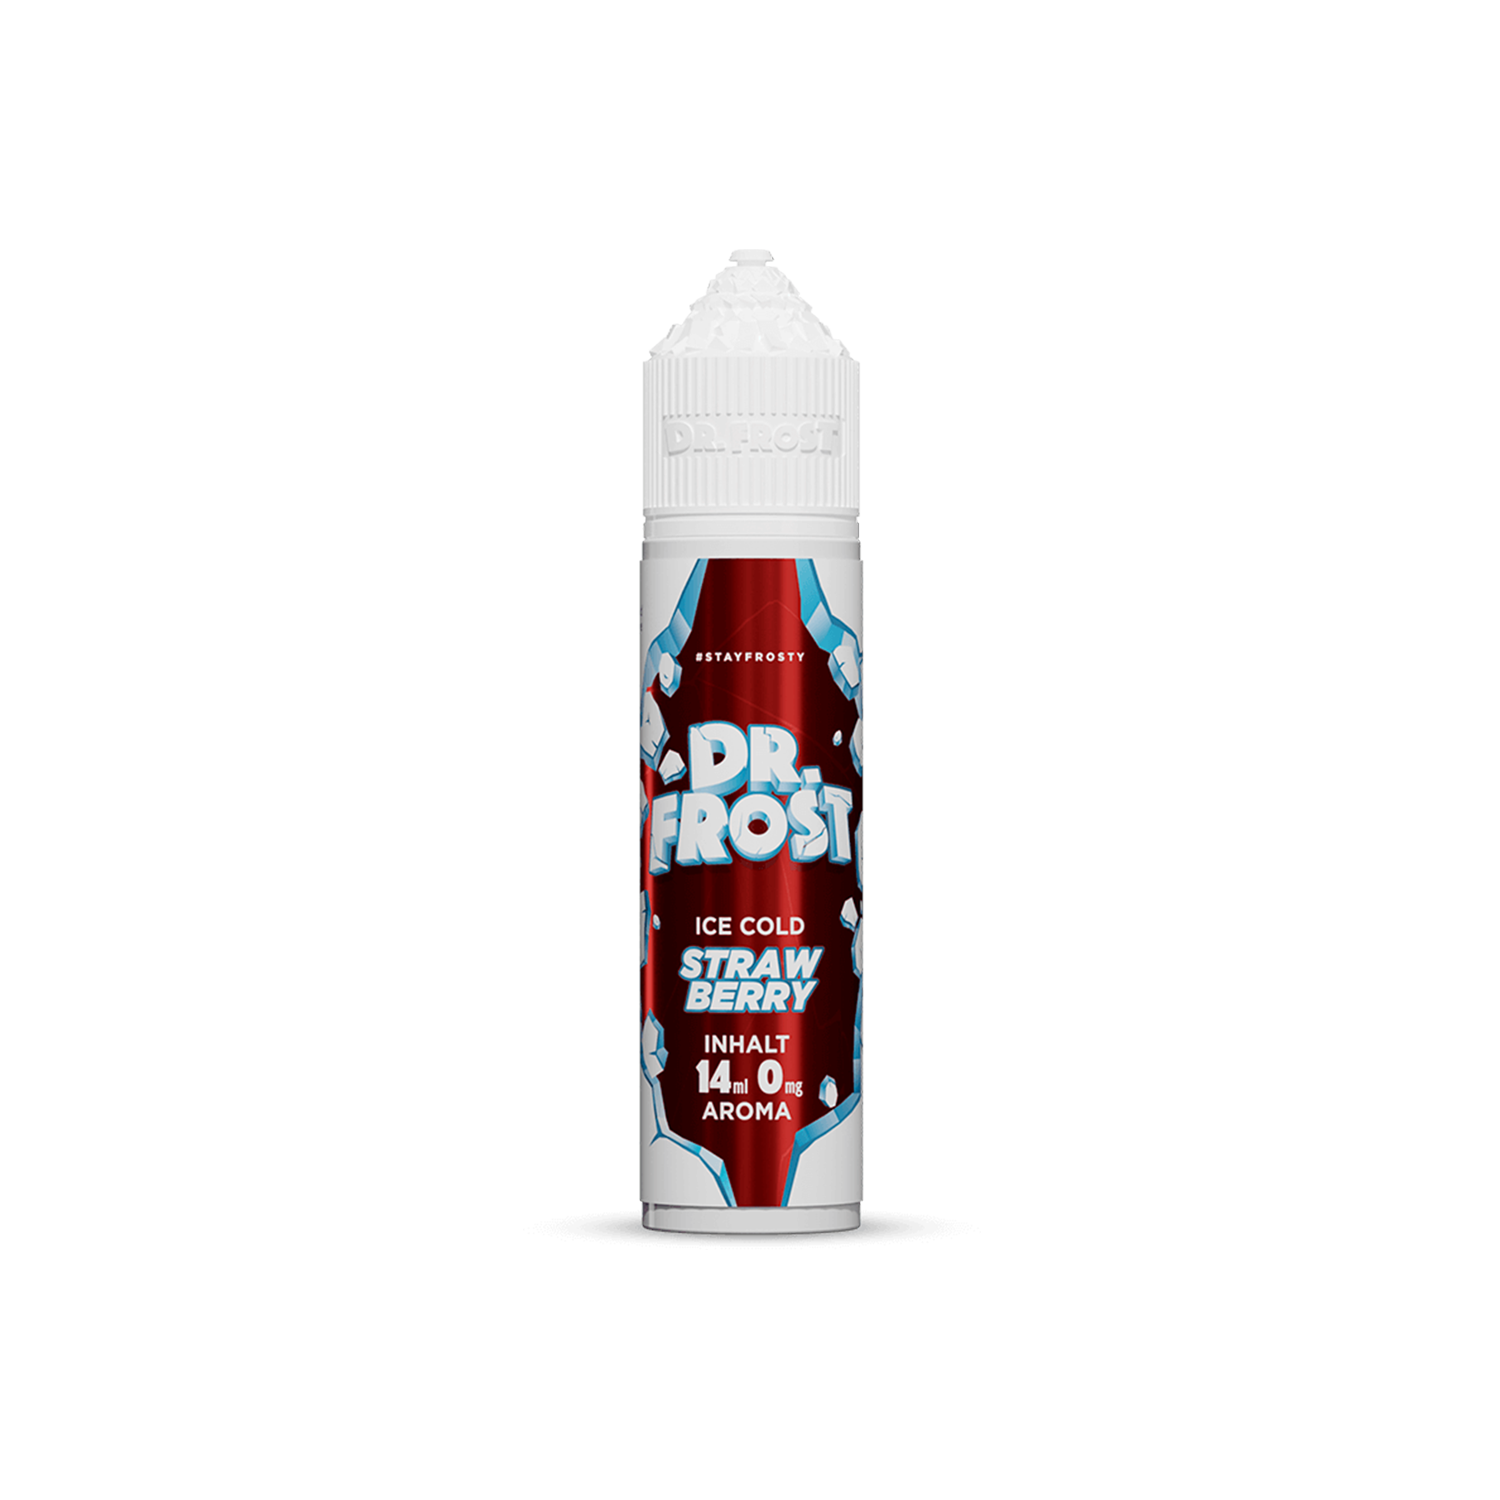 Dr. Frost - Ice Cold - Strawberry 14ml Aroma